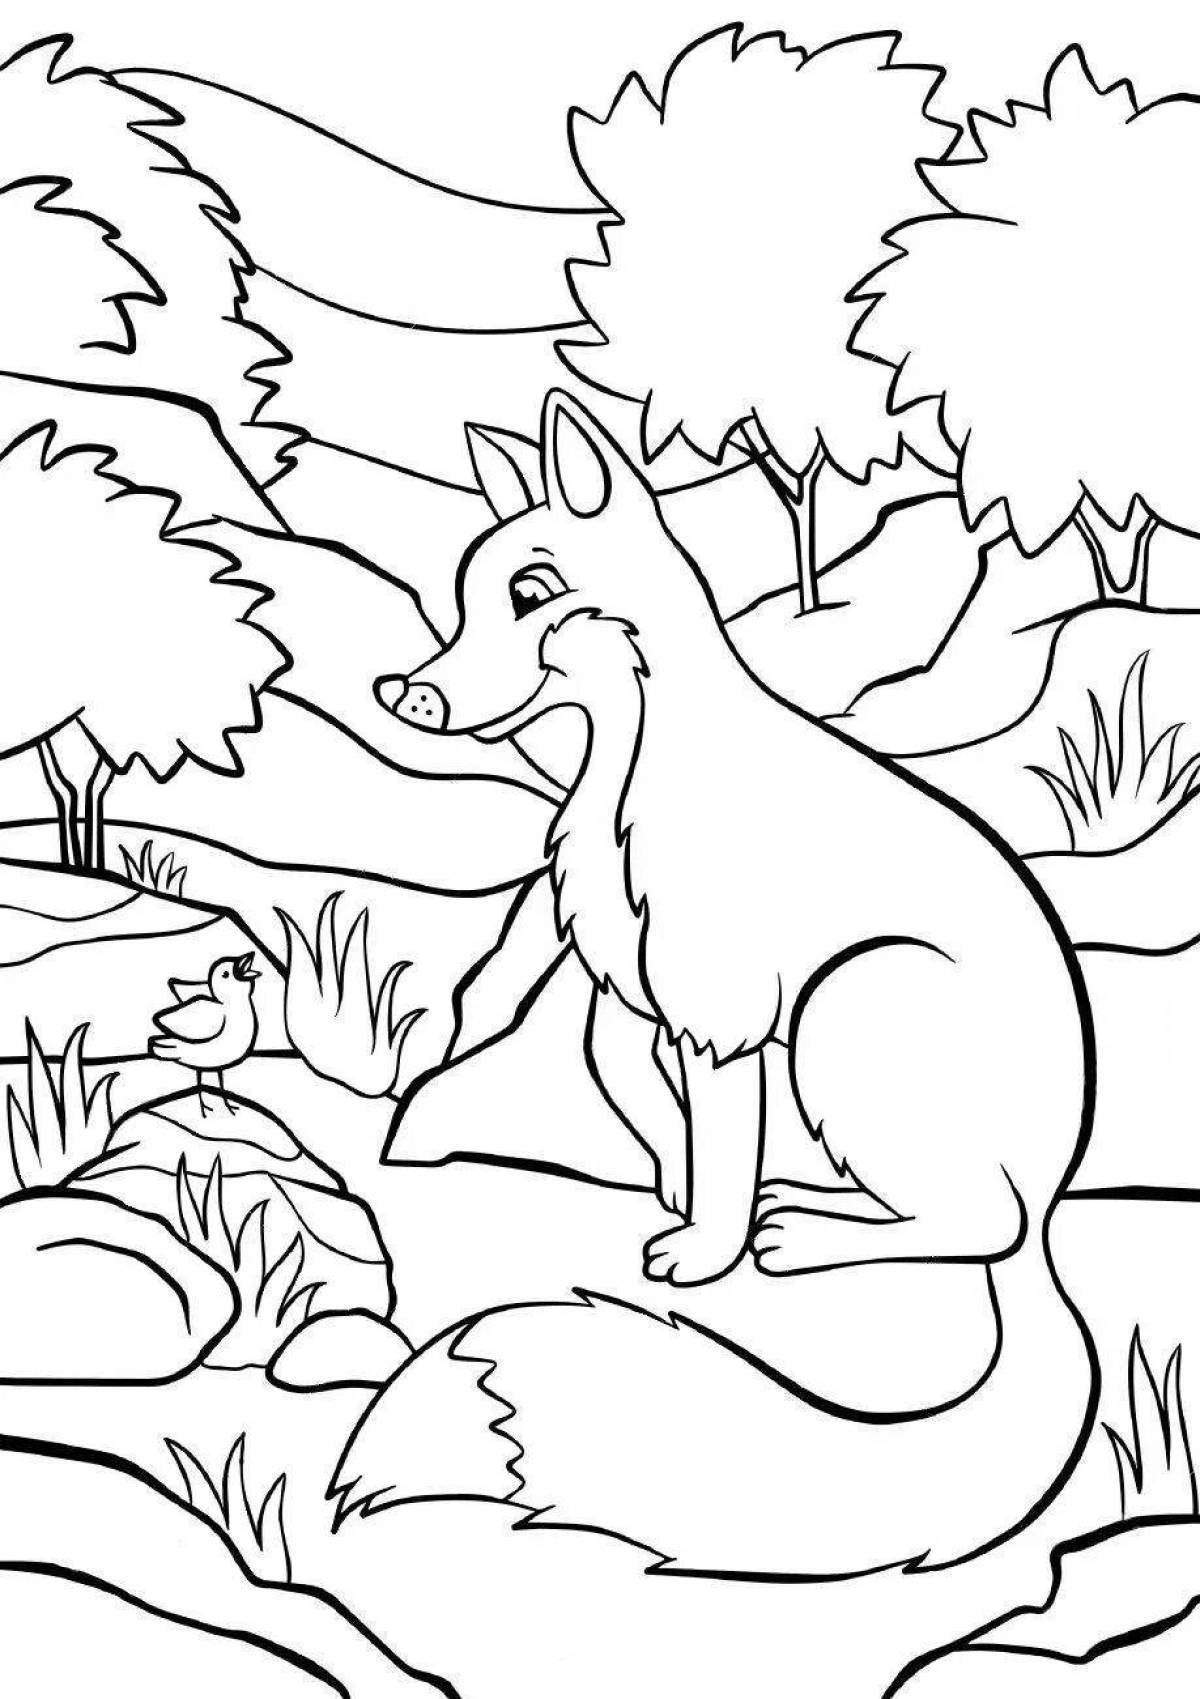 Playful fox and mouse coloring page